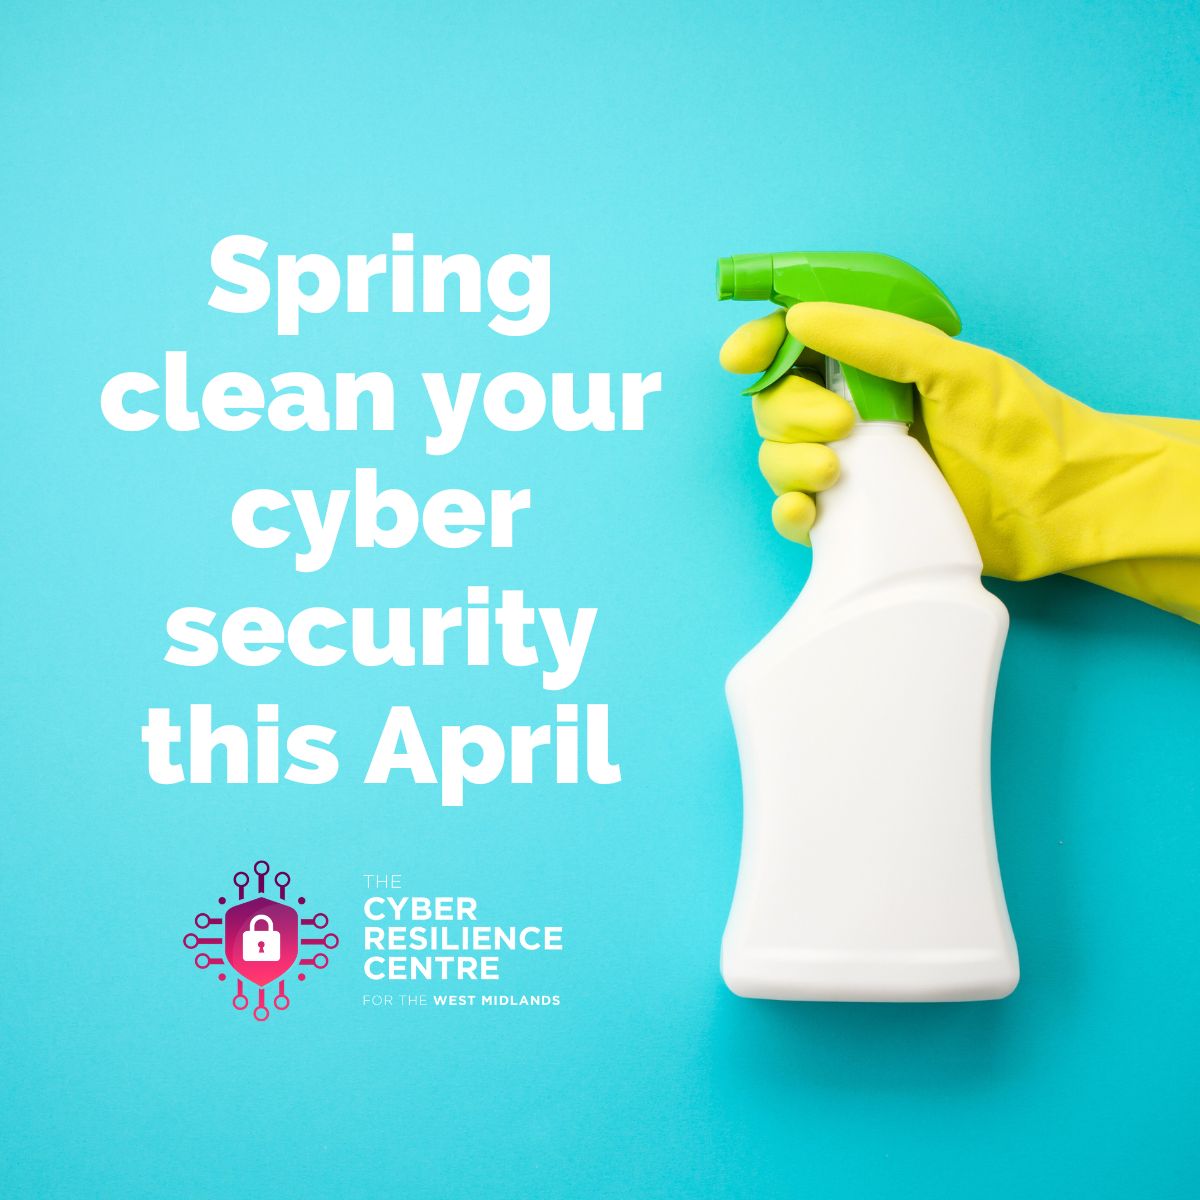 Spring is a great time to refresh your #cybersecurity with these tips: - Update passwords - Enable Multi-Factor Authentication - Review privacy settings - Backup data - Sign up for WMCRC's free membership for cyber resilience support - wmcrc.co.uk/membership